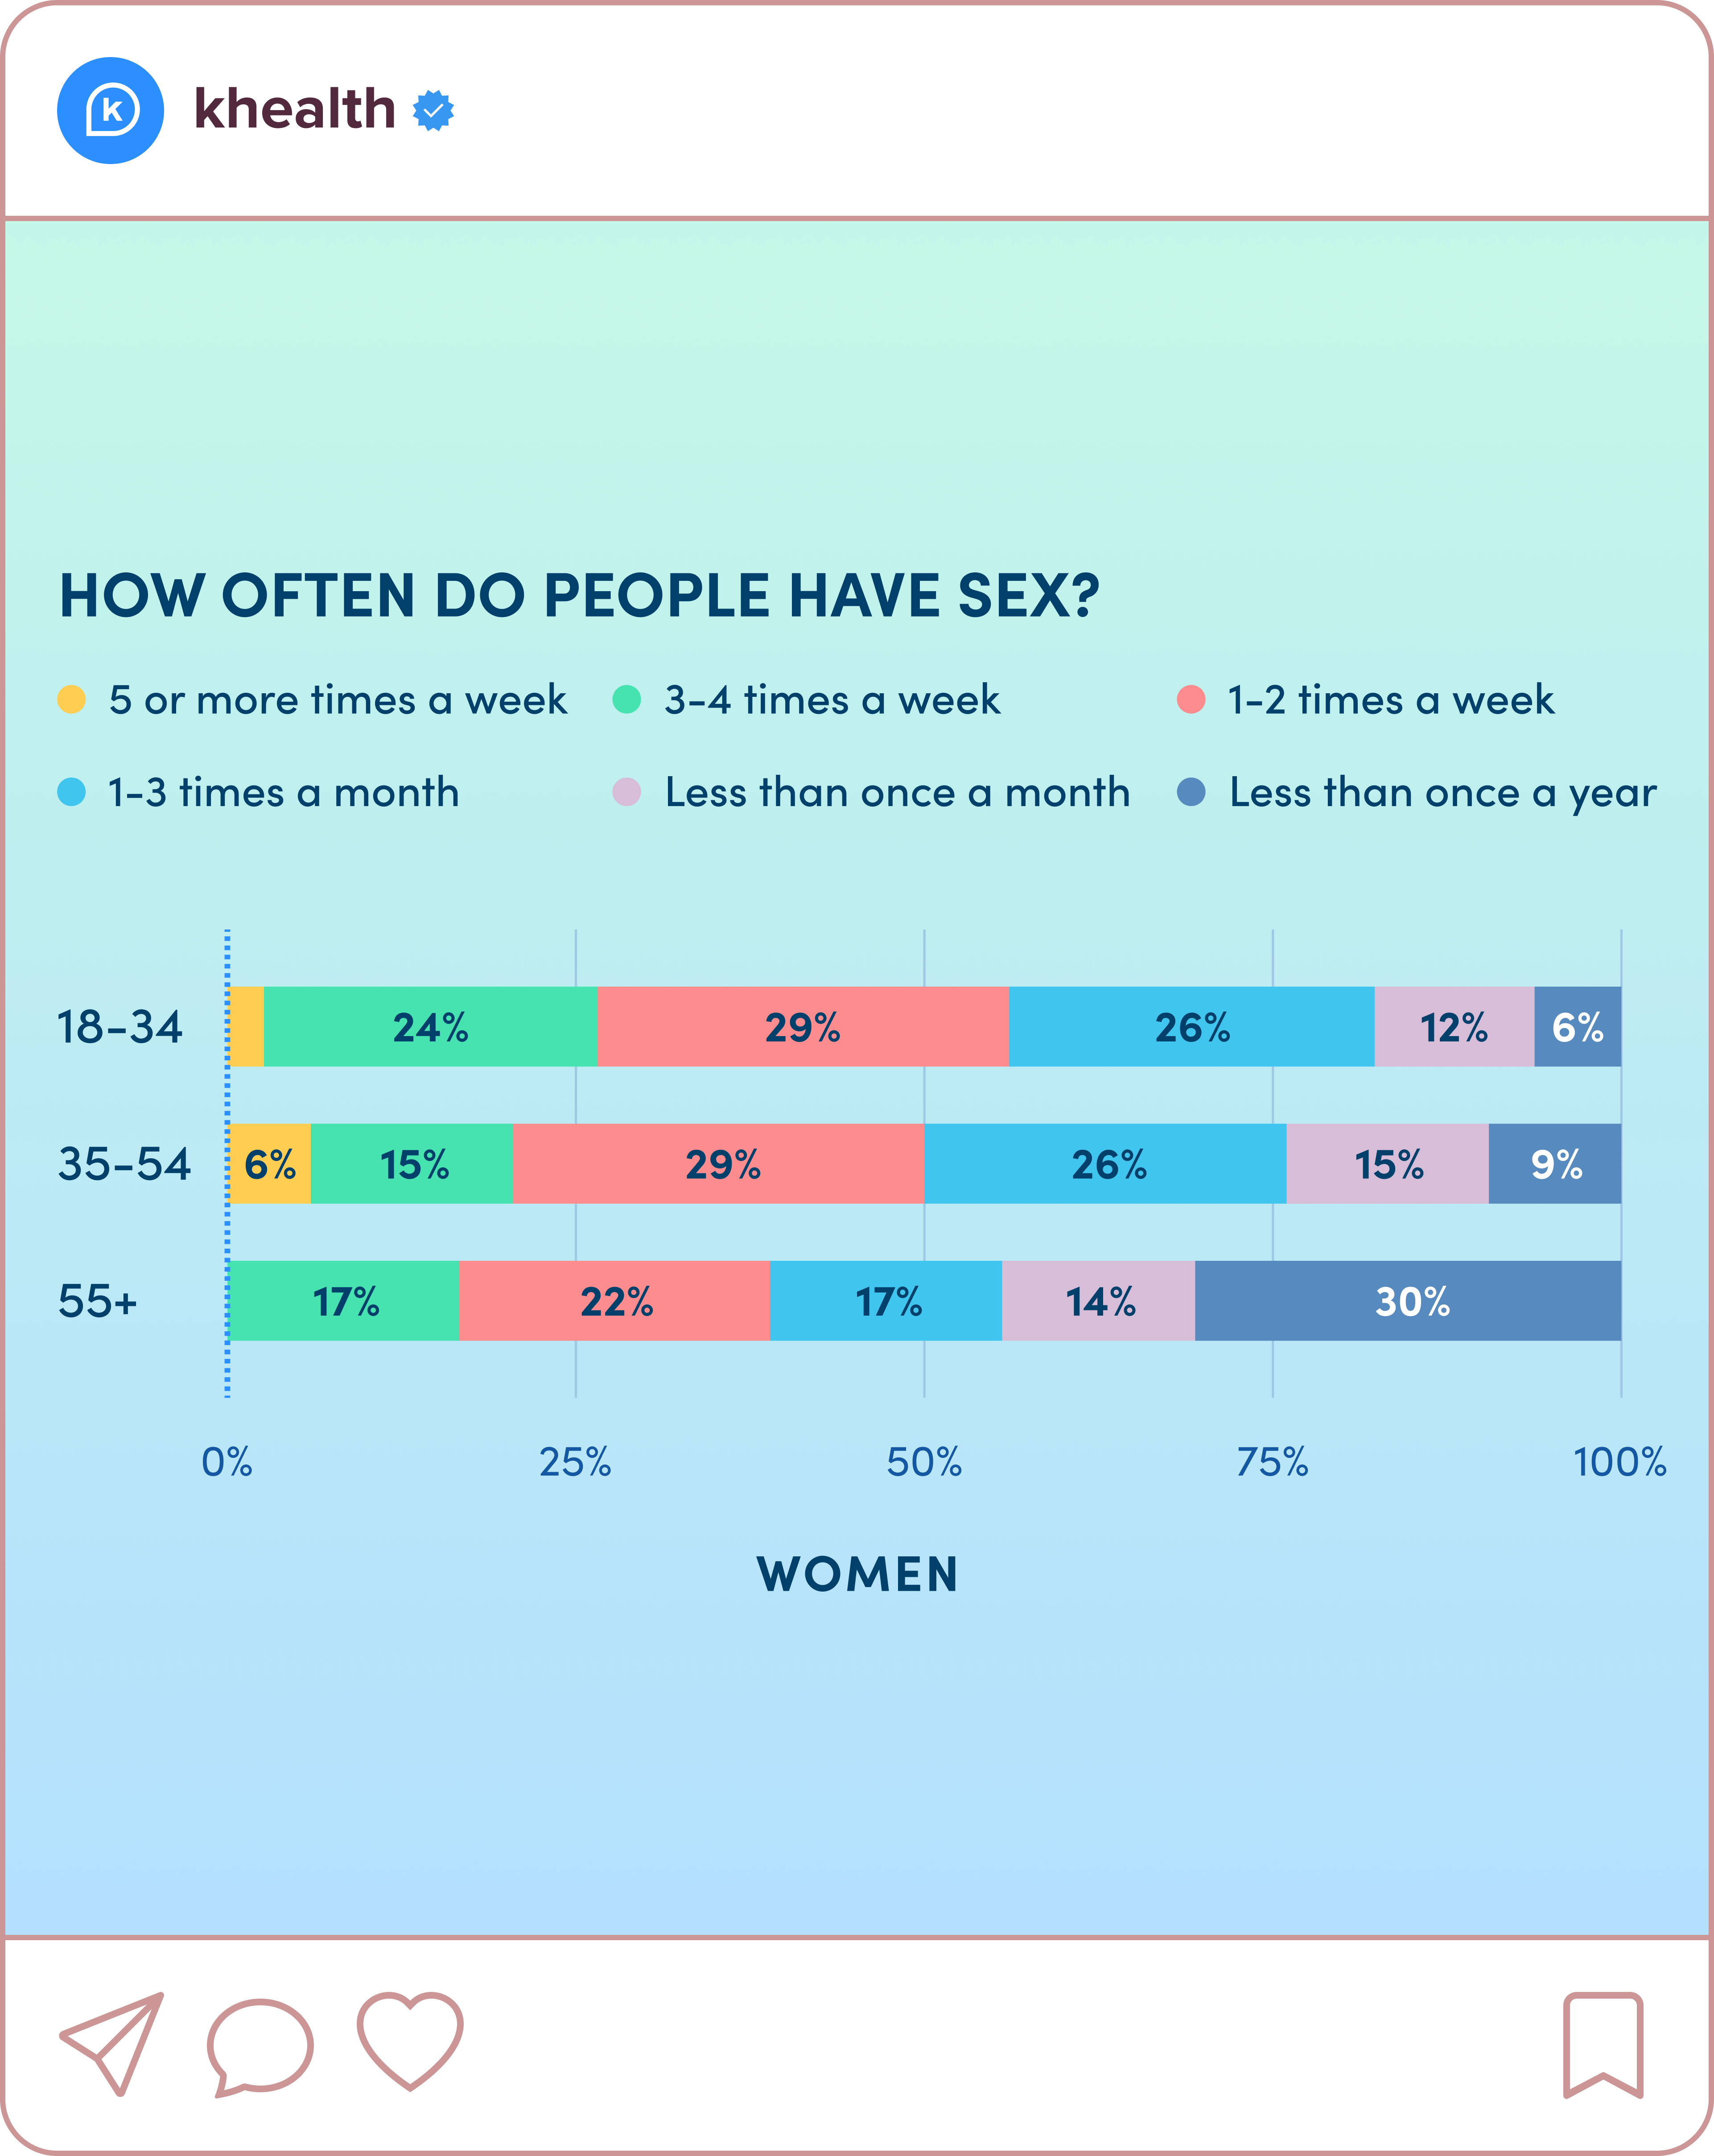 Second slide of an Instagram carousel post with bar charts of how often people have sex